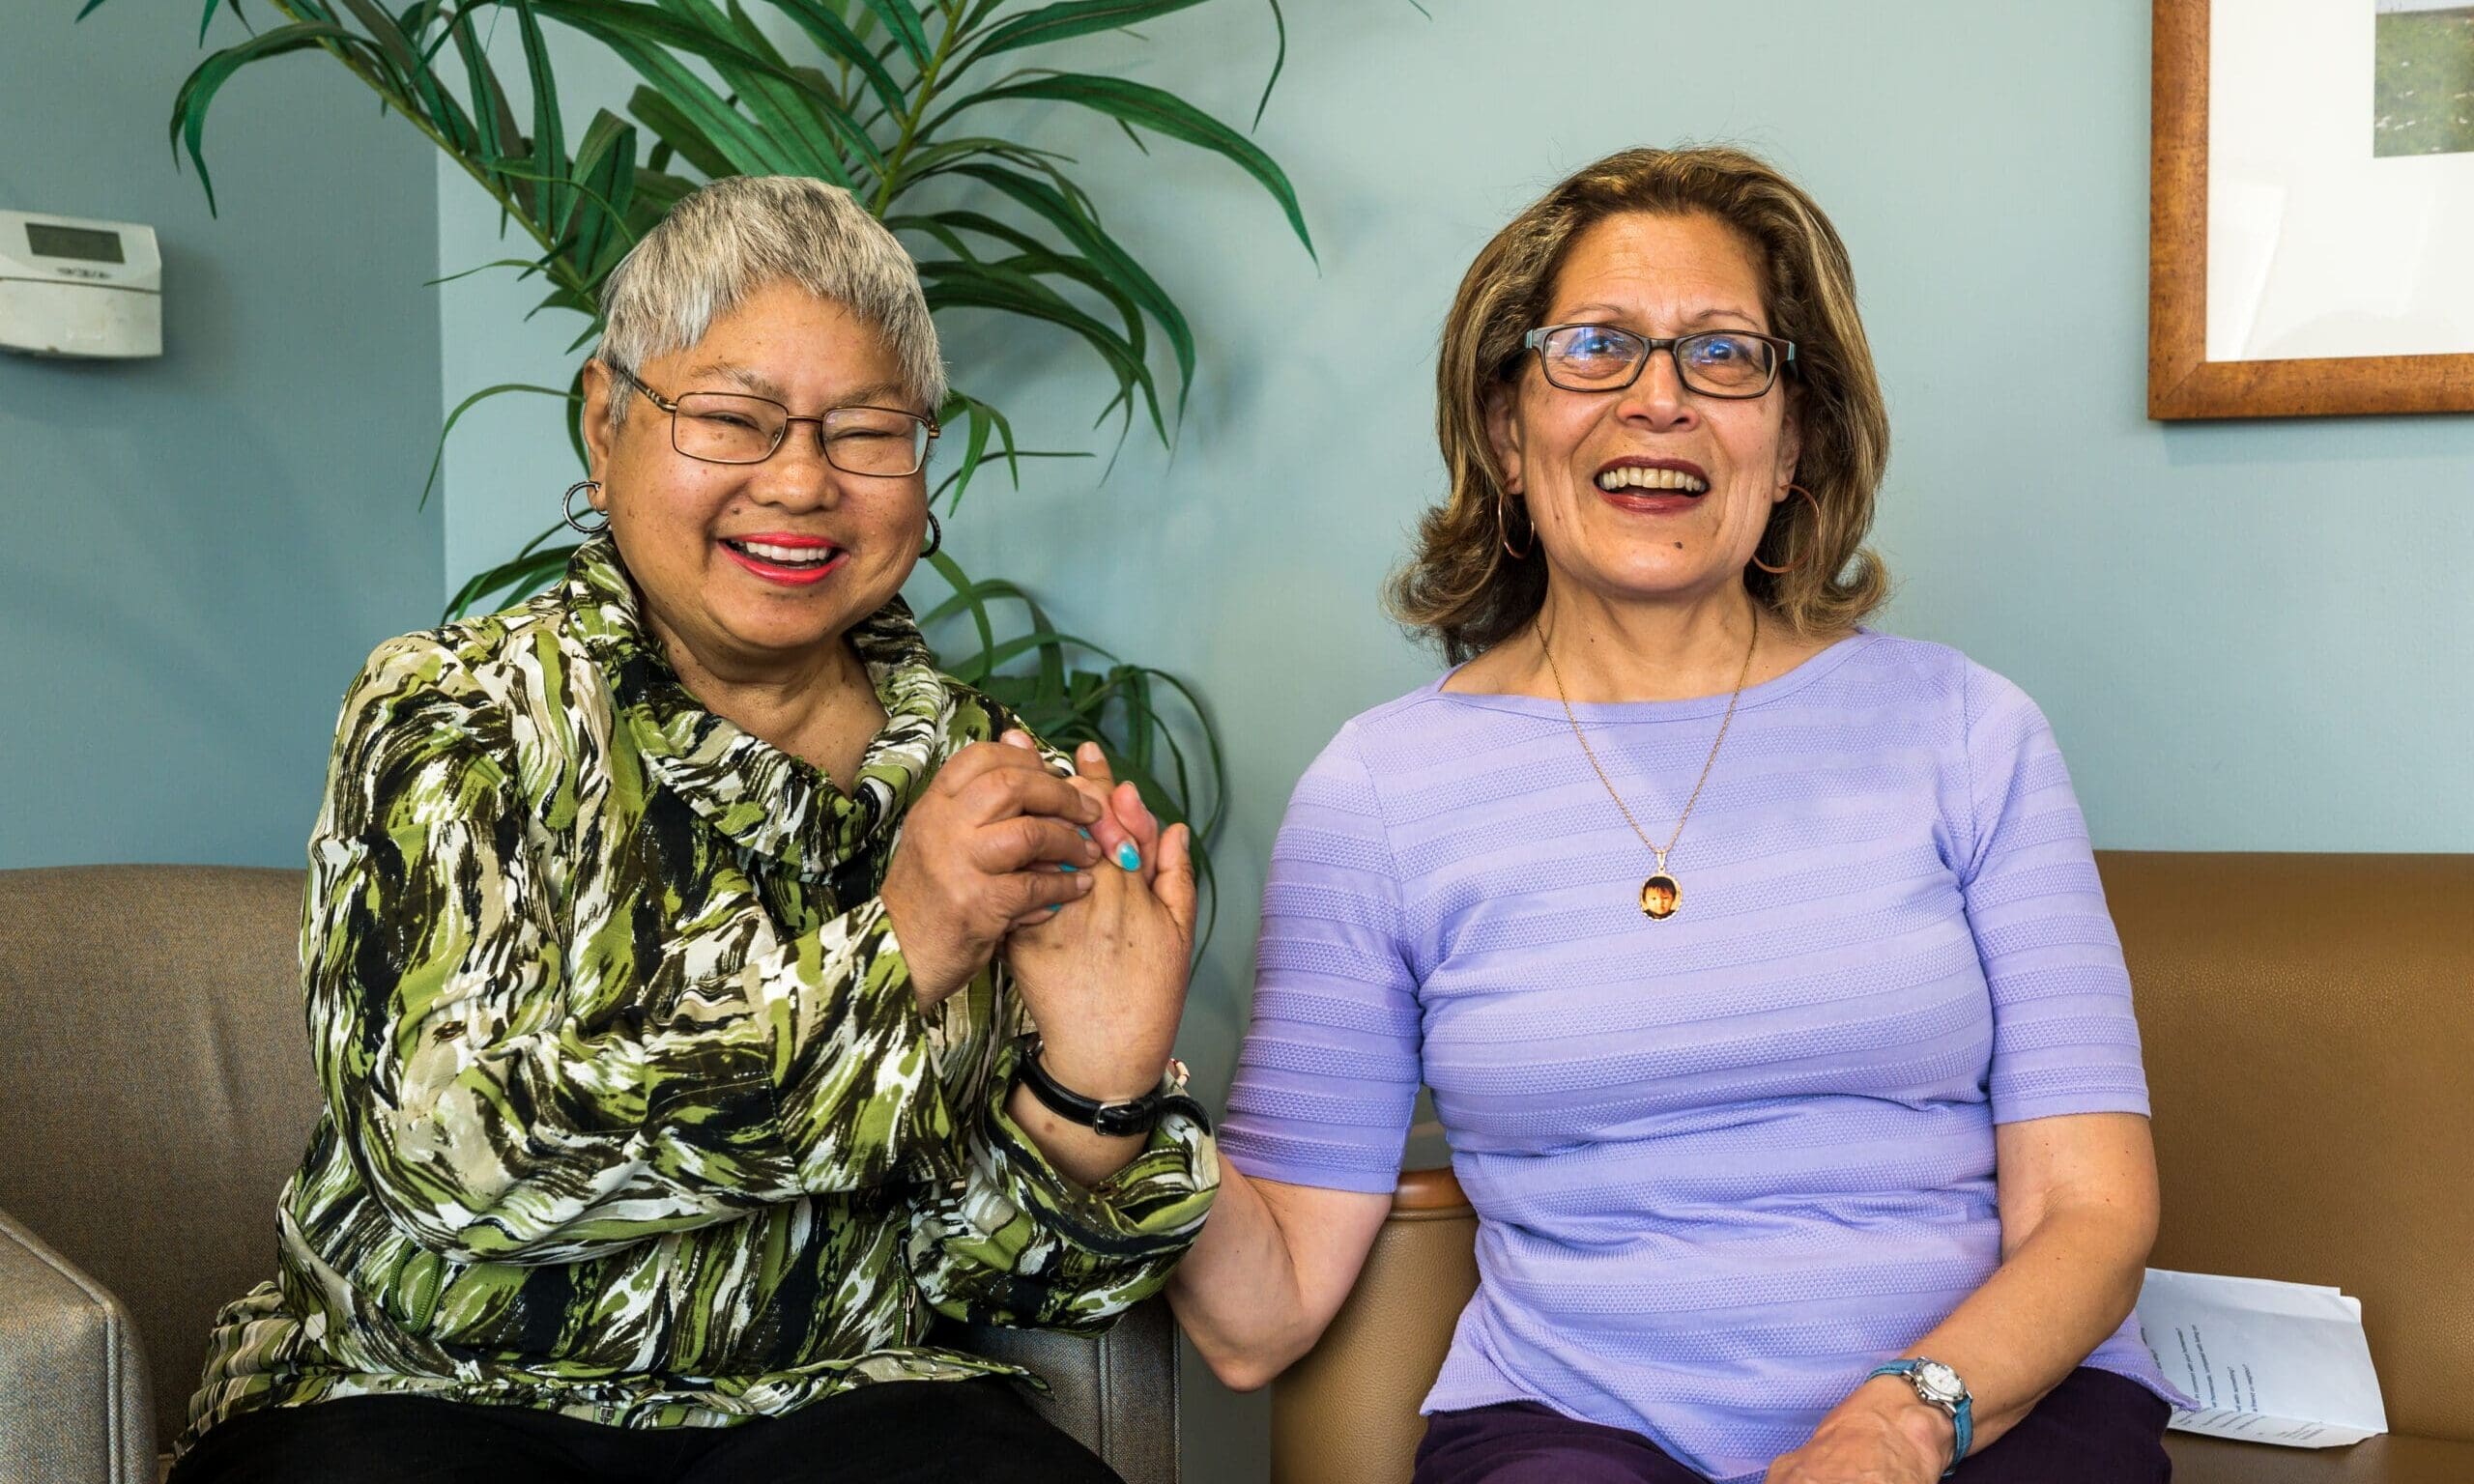 Two women smile and hold hands